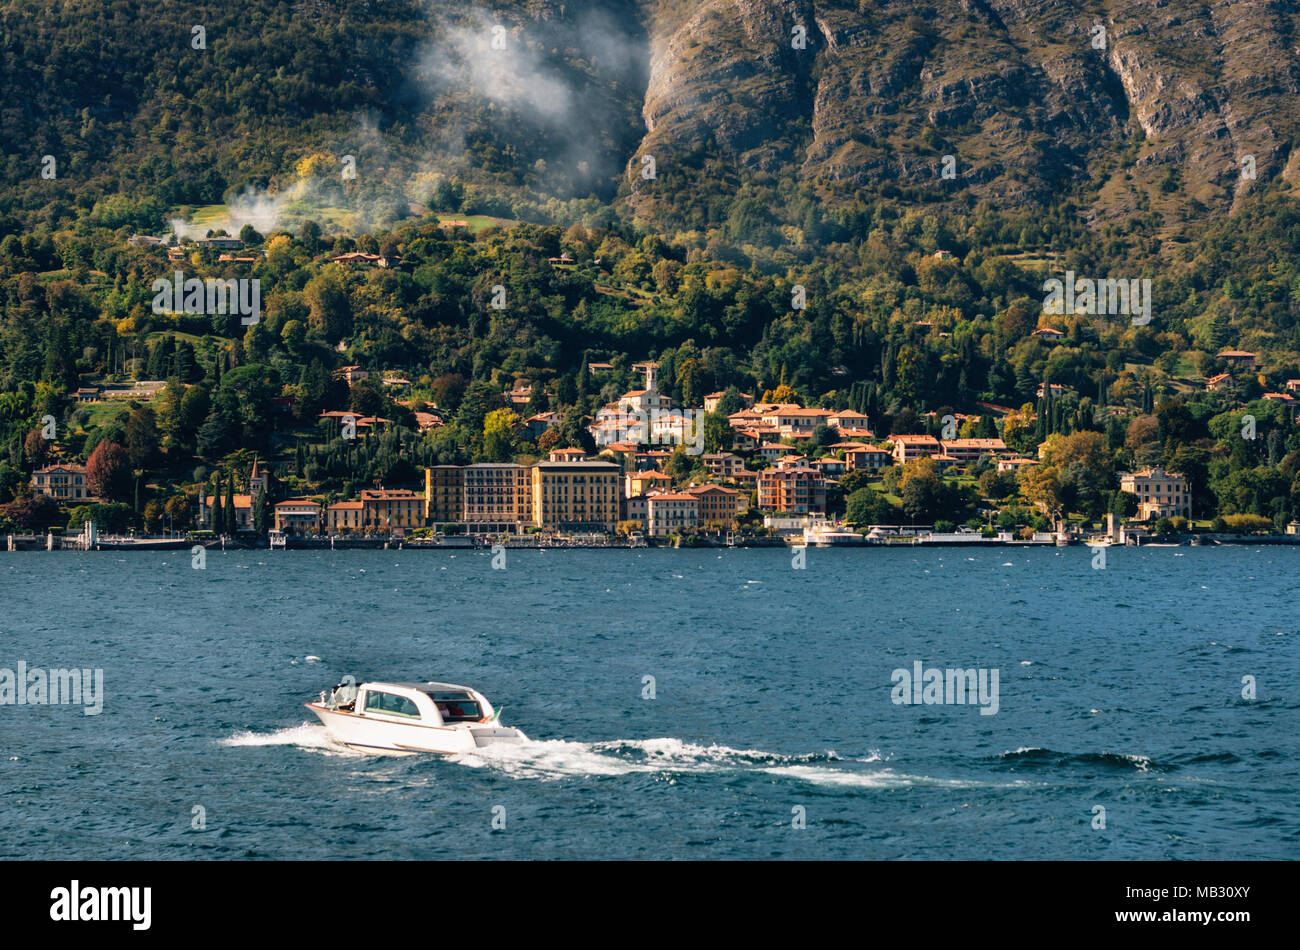 Boat moves against Cadenabbia town with buildings and hotels, coast of beautiful Como lake, Italy. Stock Photo